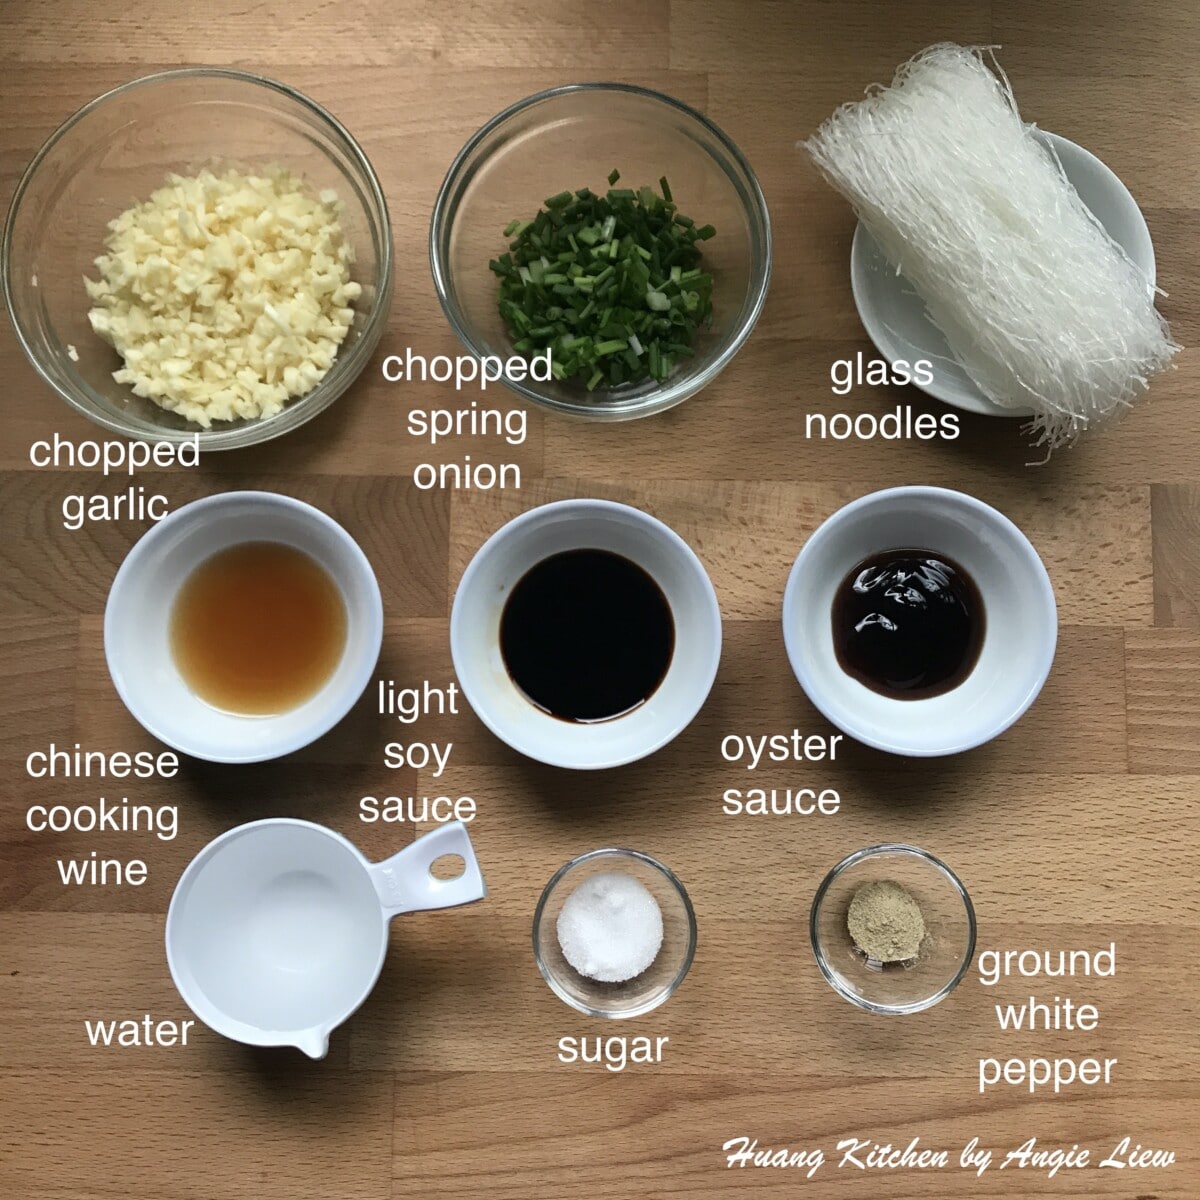 Ingredients for the dish.